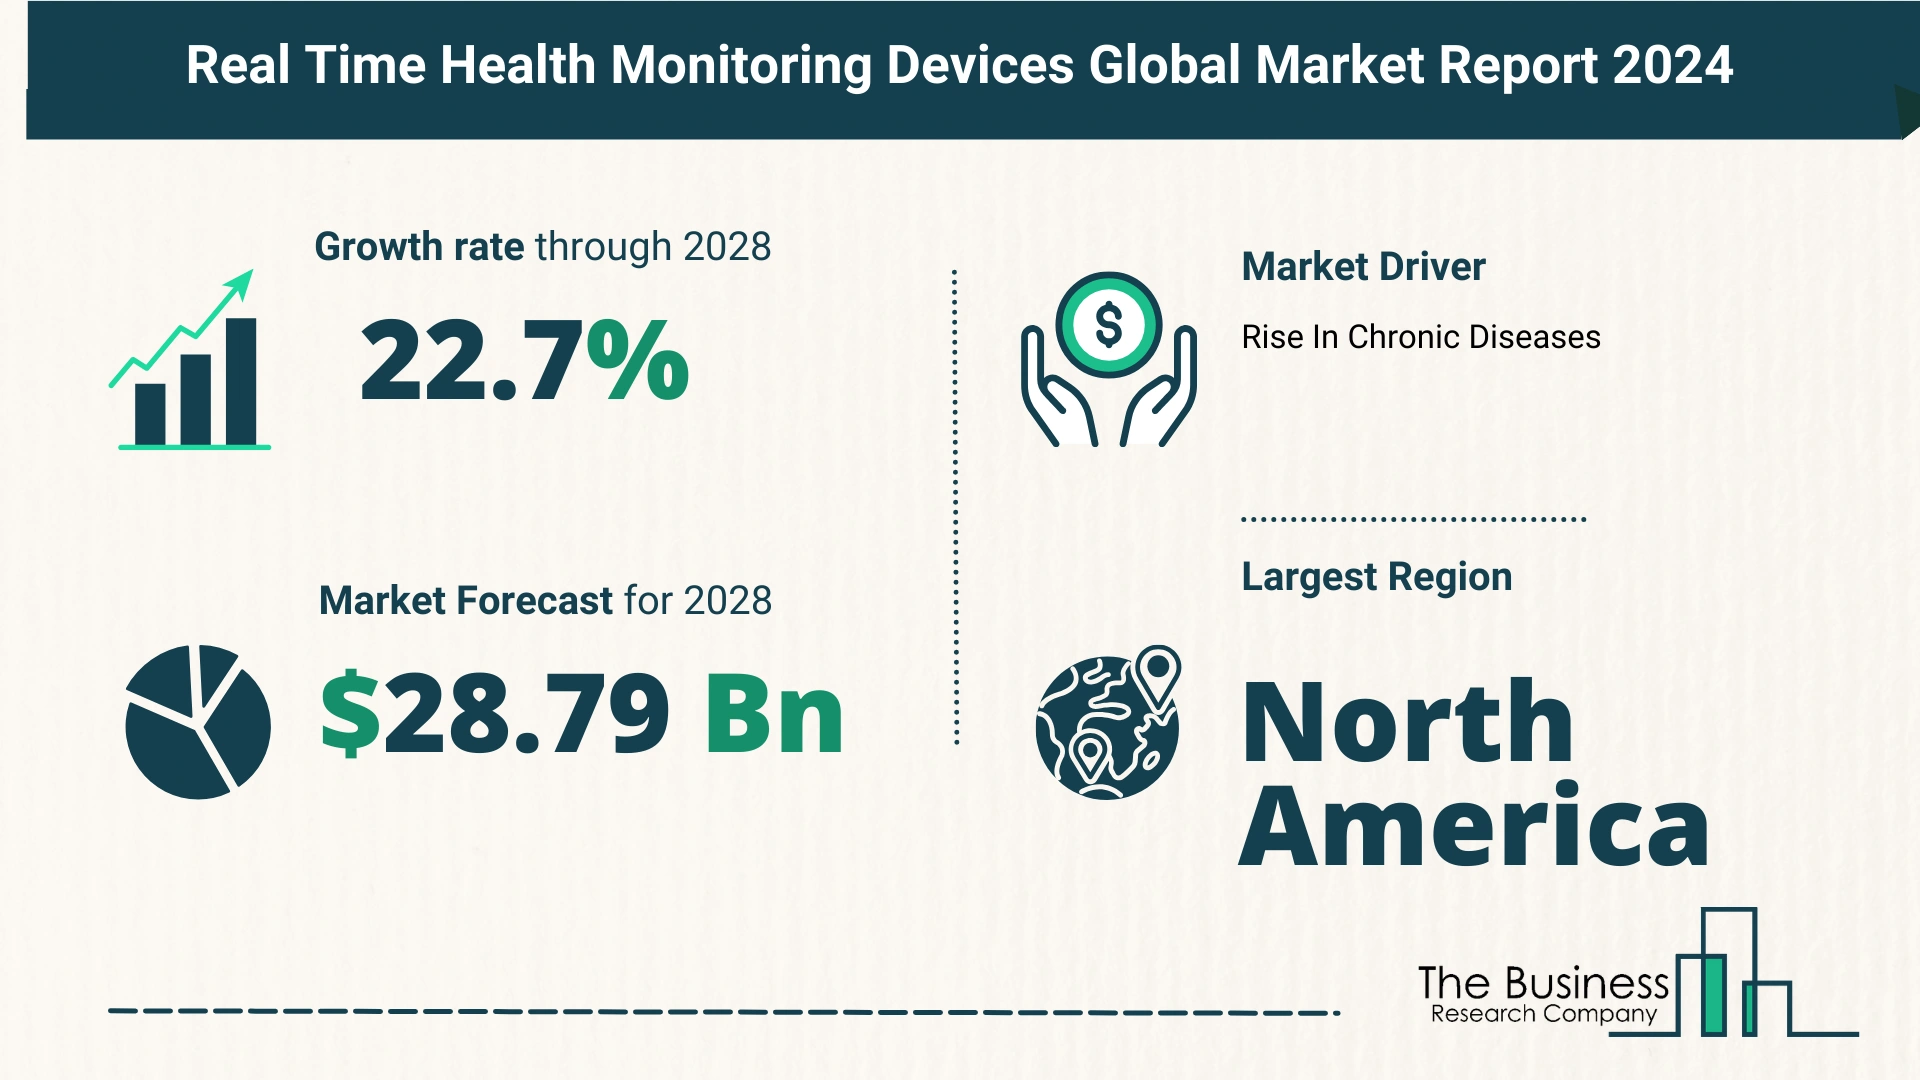 Global Real Time Health Monitoring Devices Market Size